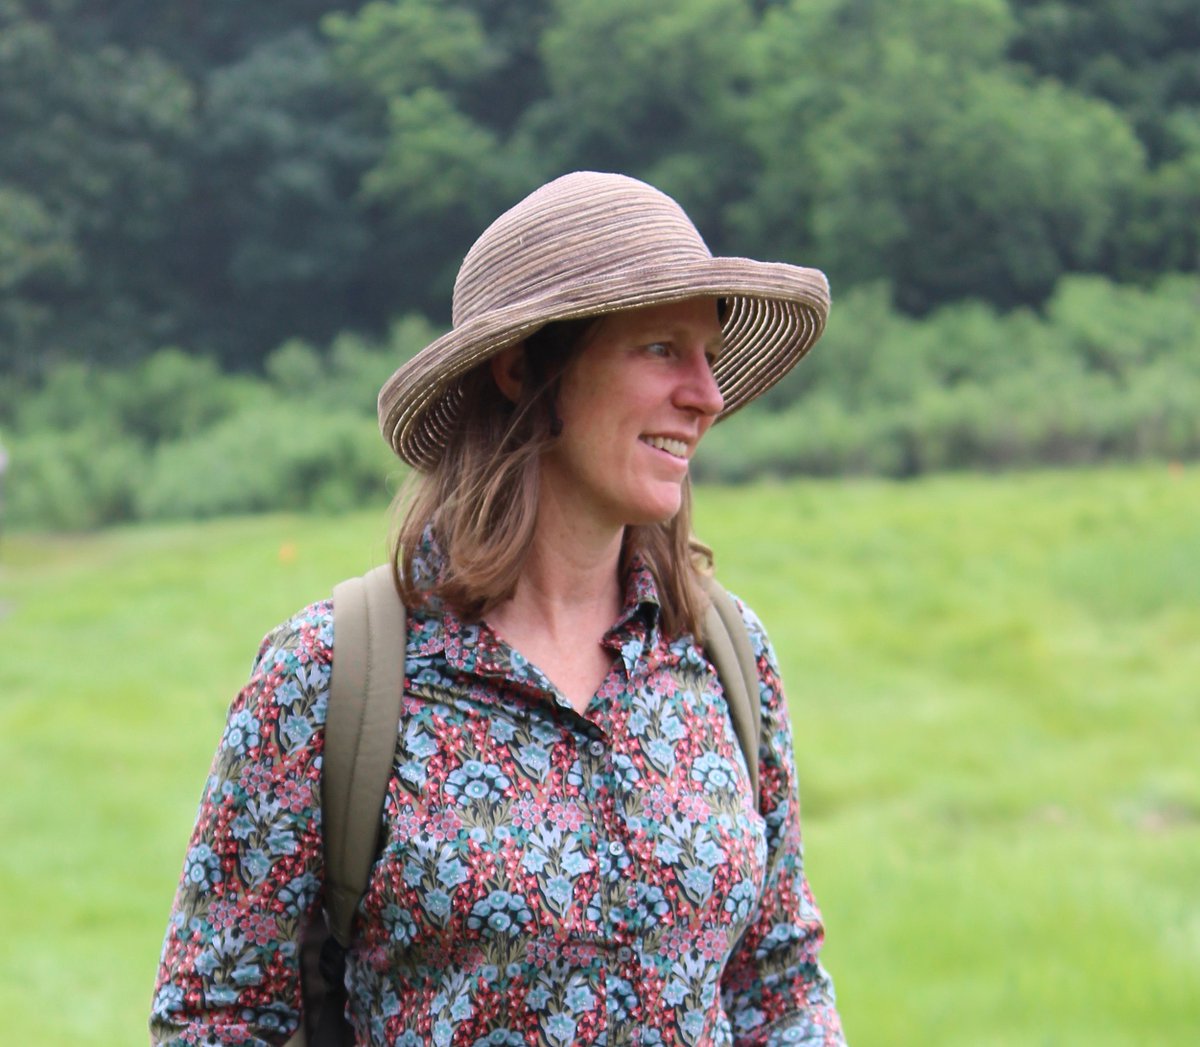 test Twitter Media - This past weekend was #ArborDay, so we were lucky to catch up with Maggie Redfern from @CCArboretum to chat about one of her great joys in life after trees, books!
https://t.co/HgJNiWHSSk https://t.co/iXCHvokzZL